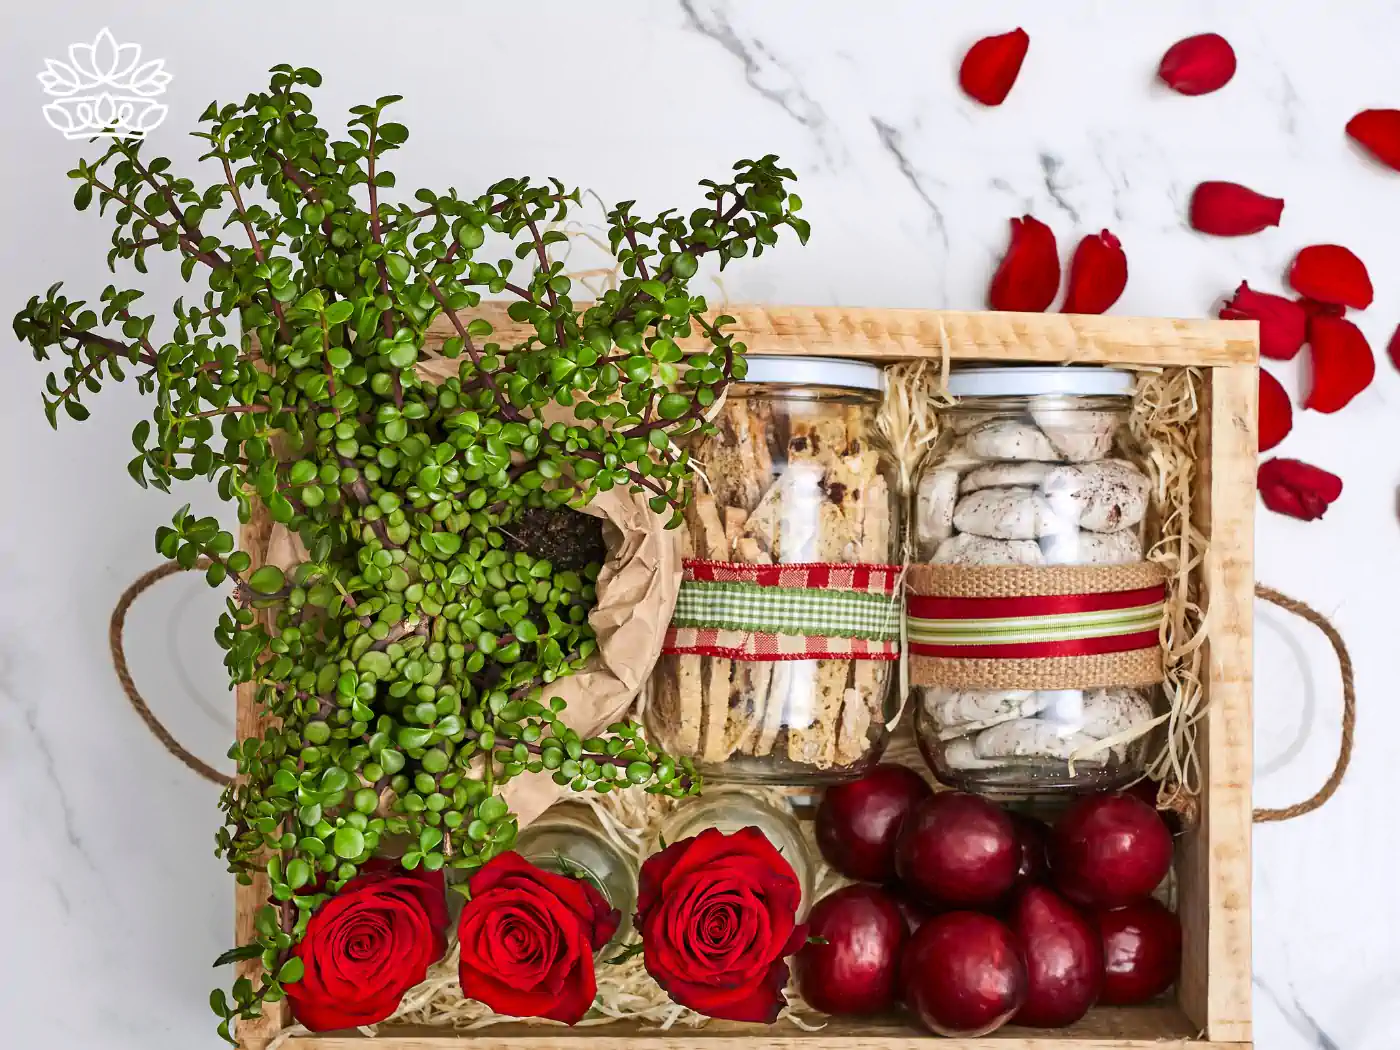 Charming gift tray with a vibrant jade plant, fresh red roses, plums, and jars filled with cookies and sweets, thoughtfully arranged. Fabulous Flowers and Gifts - Housewarming. Delivered with Heart.